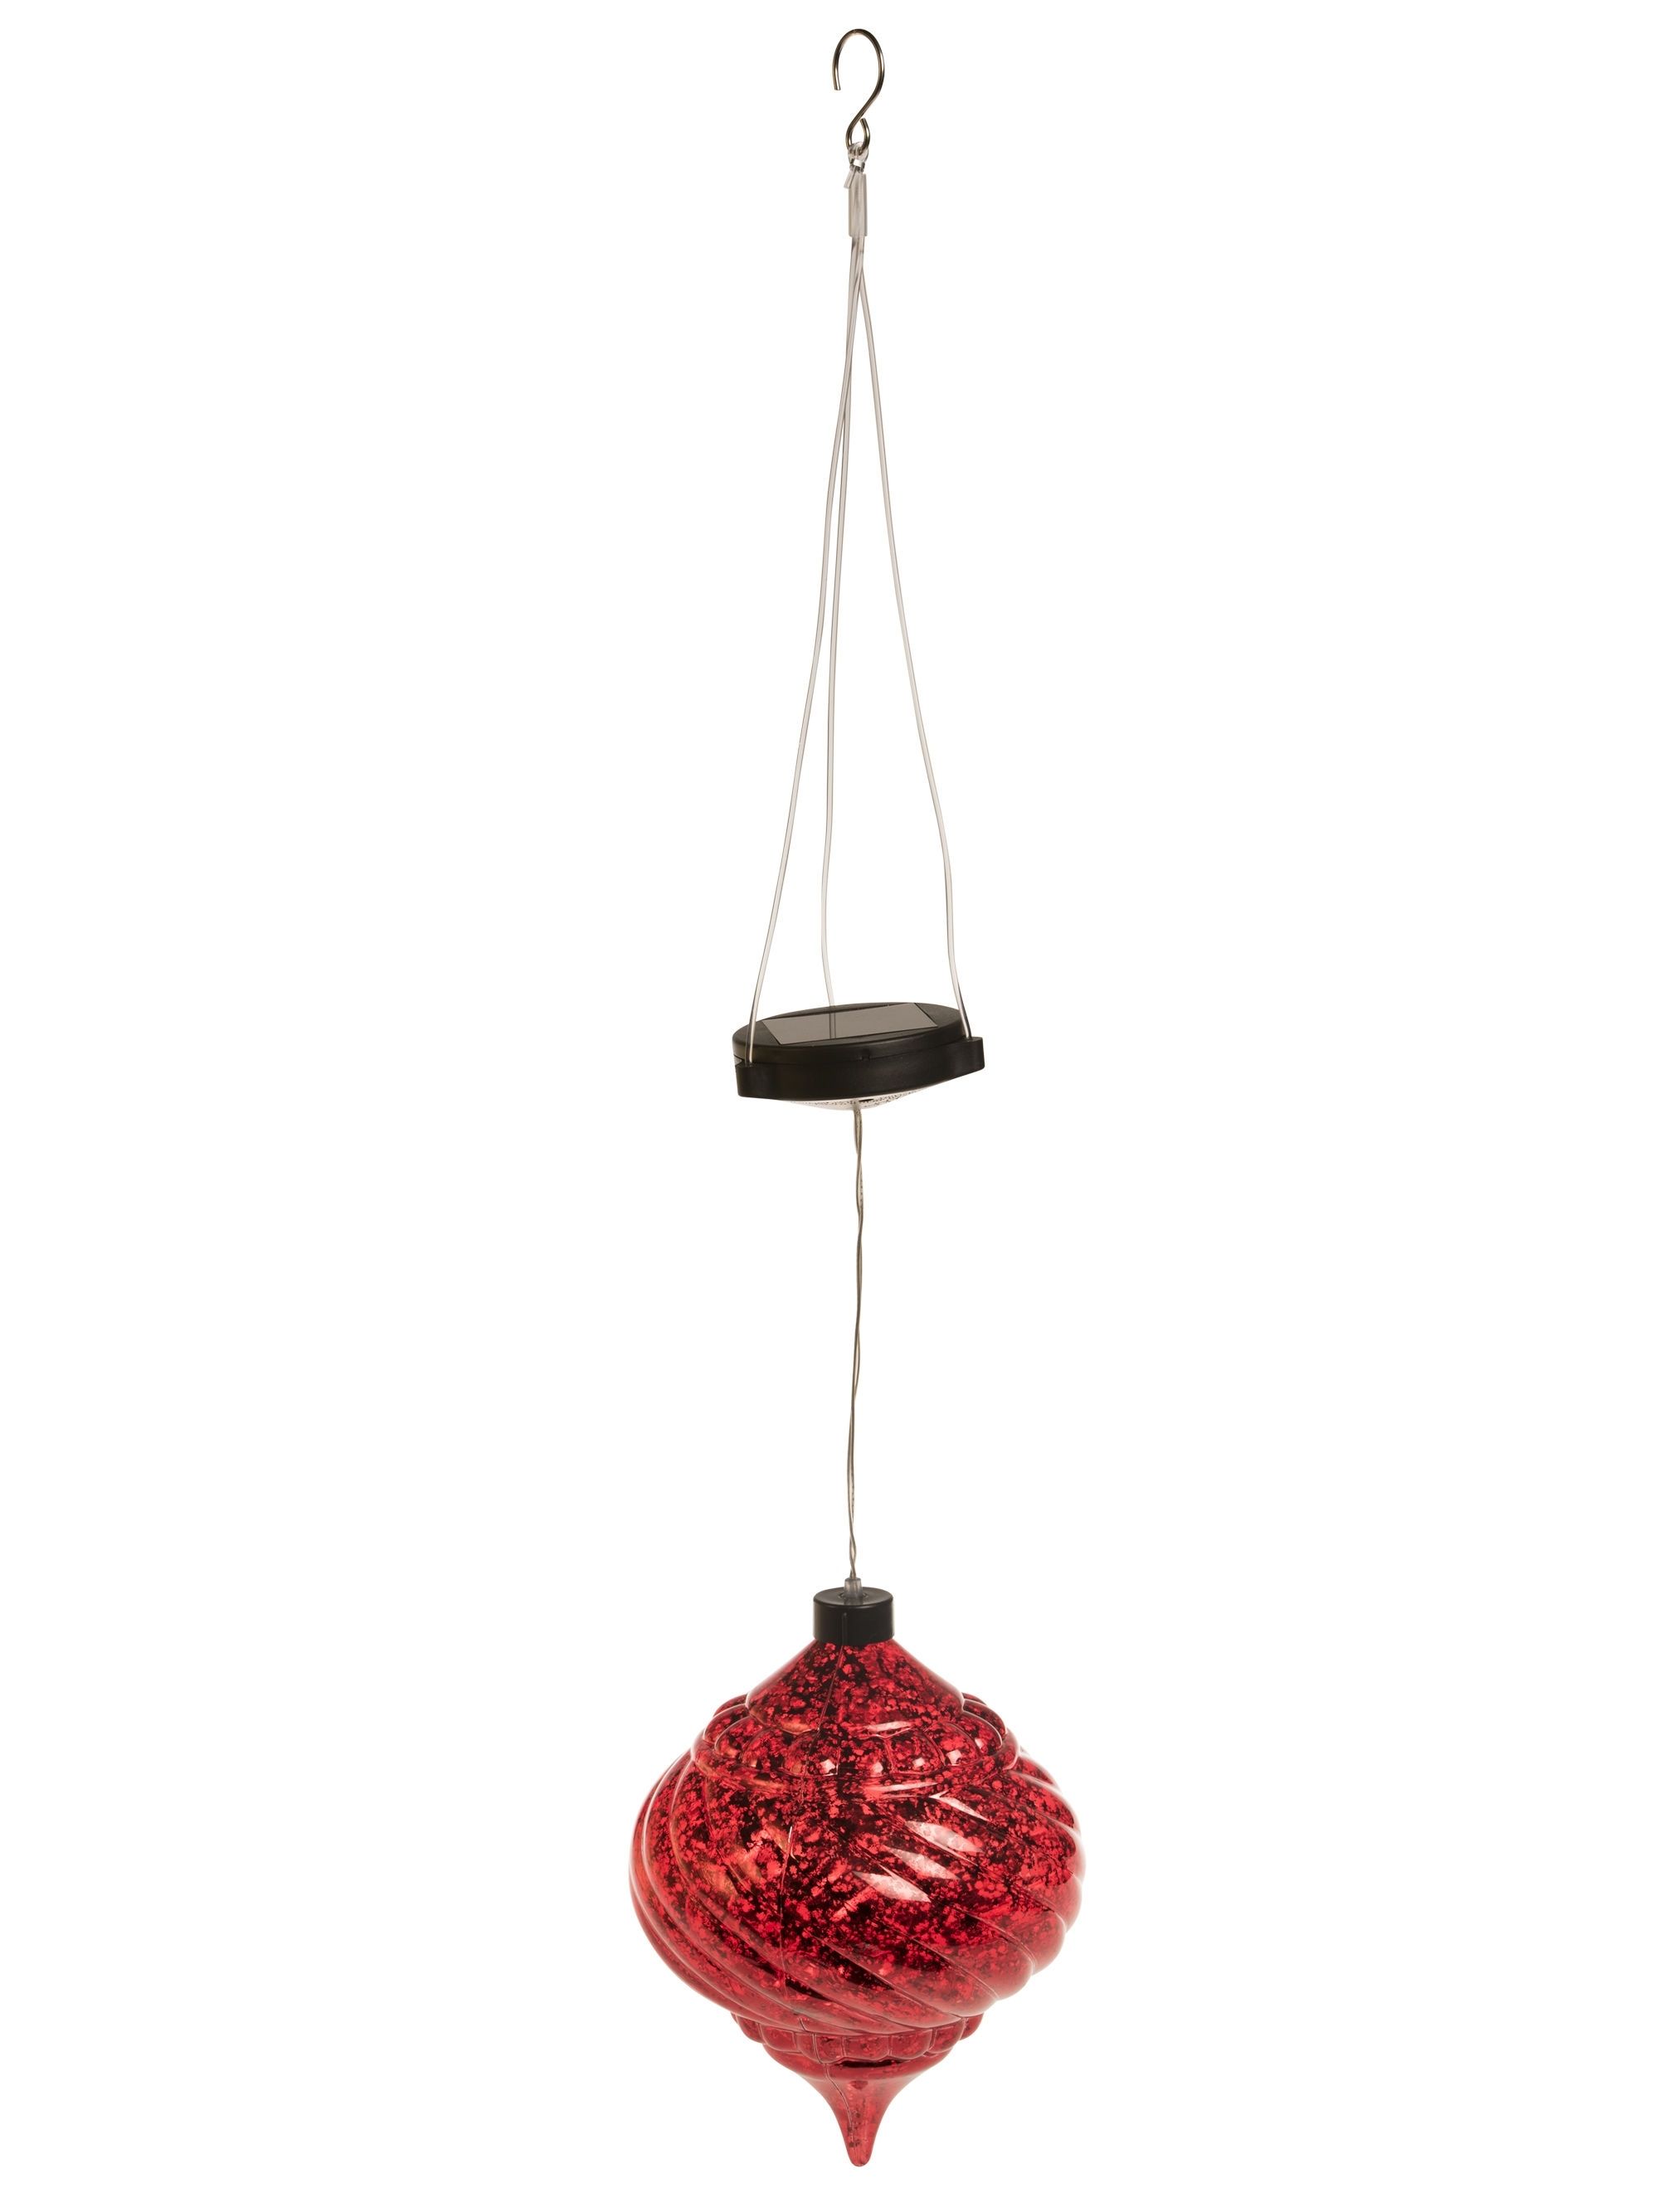 Preferred Outdoor Hanging Ornament Lights With Regard To Large Outdoor Christmas Ornaments – Hanging Onion Solar Ornament (View 17 of 20)